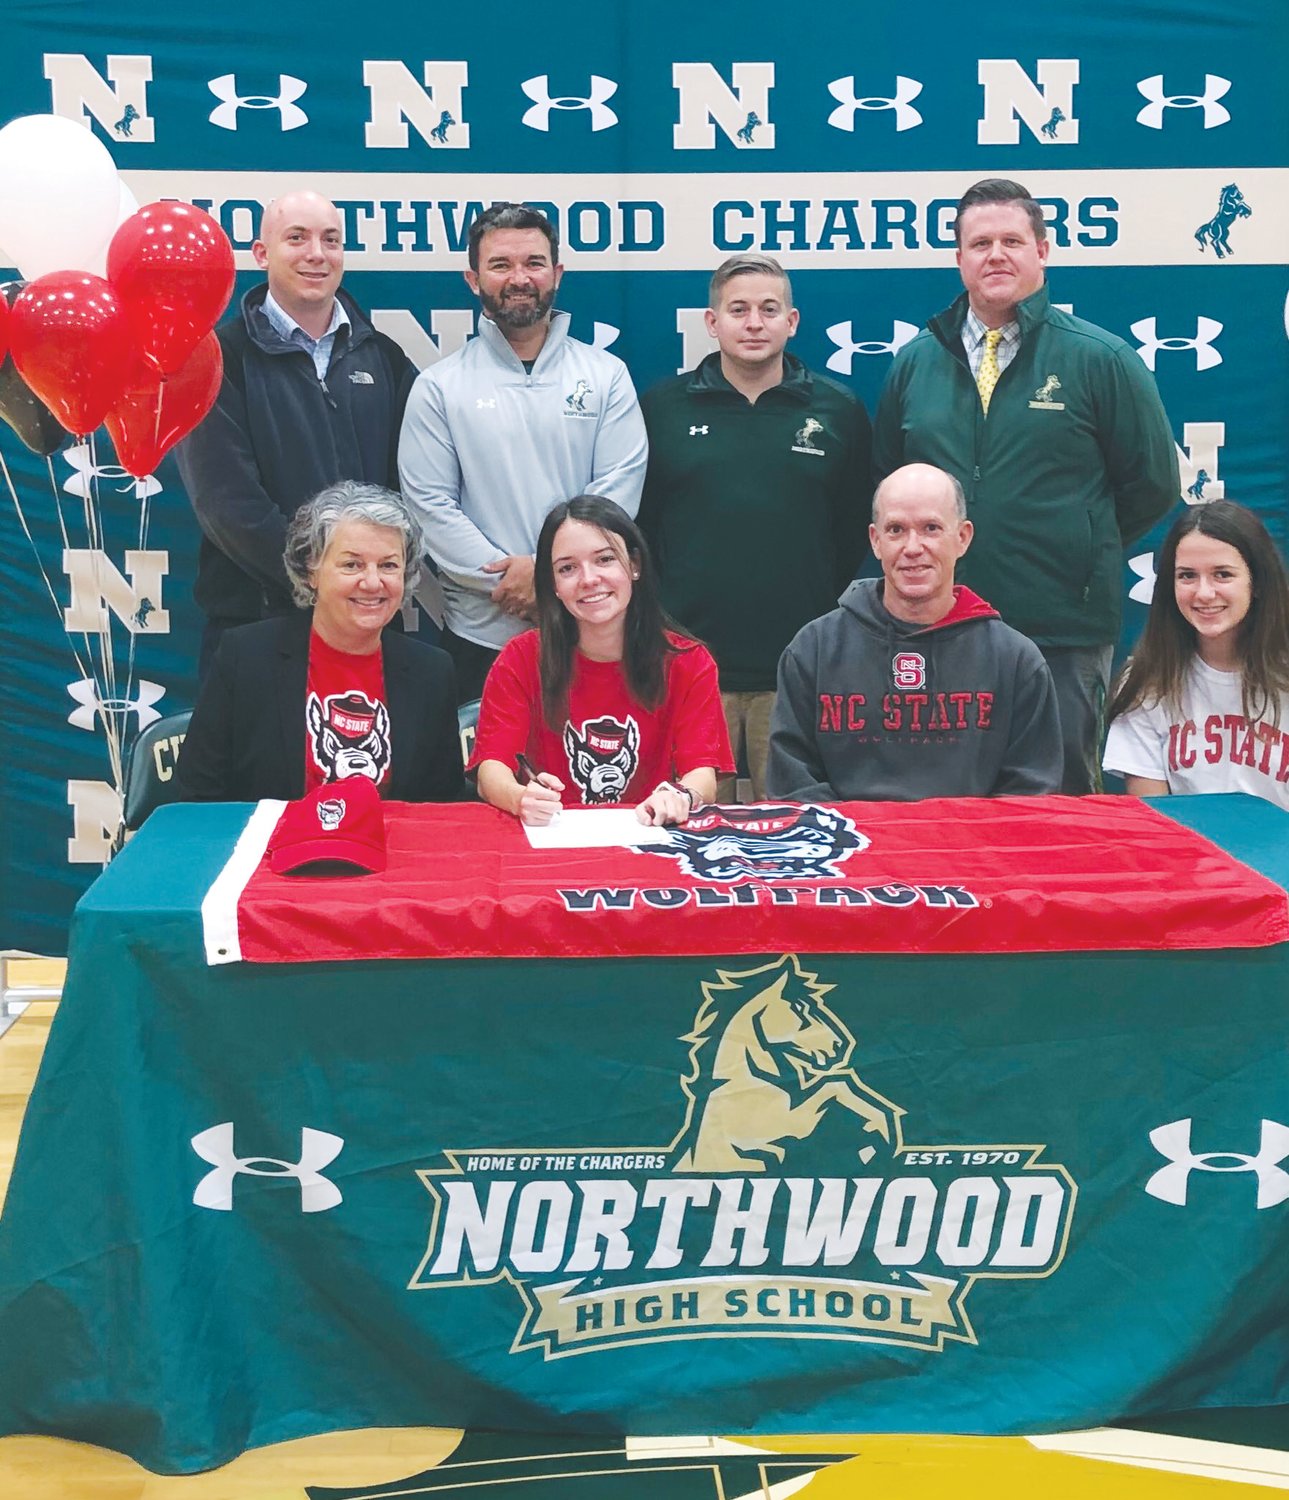 Northwood senior Caroline Murrell (center, red shirt), surrounded by her family and Northwood staff, signs her letter of intent to attend N.C. State next fall, where she'll run cross country for the Wolfpack.